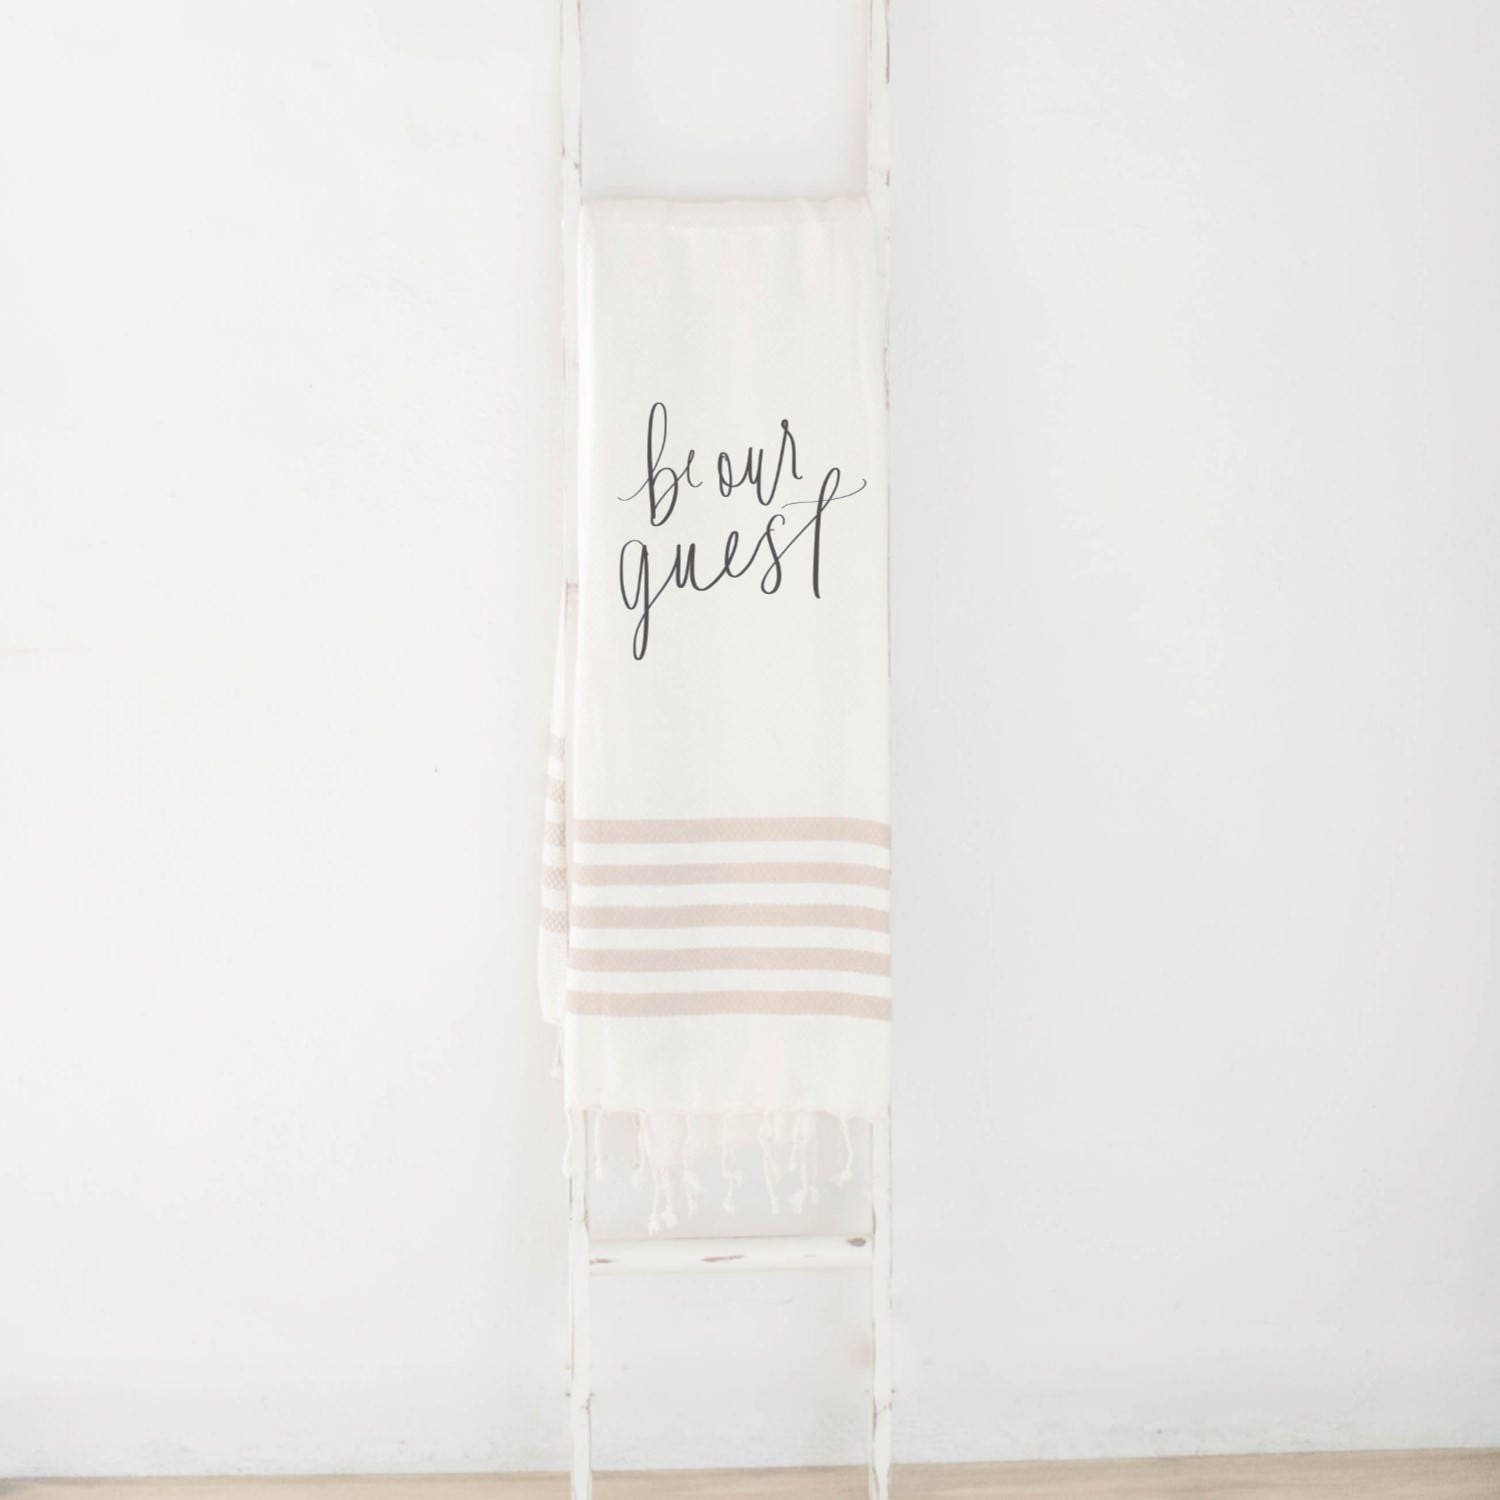 Have a special throw blanket to keep your guests cozy during their stay